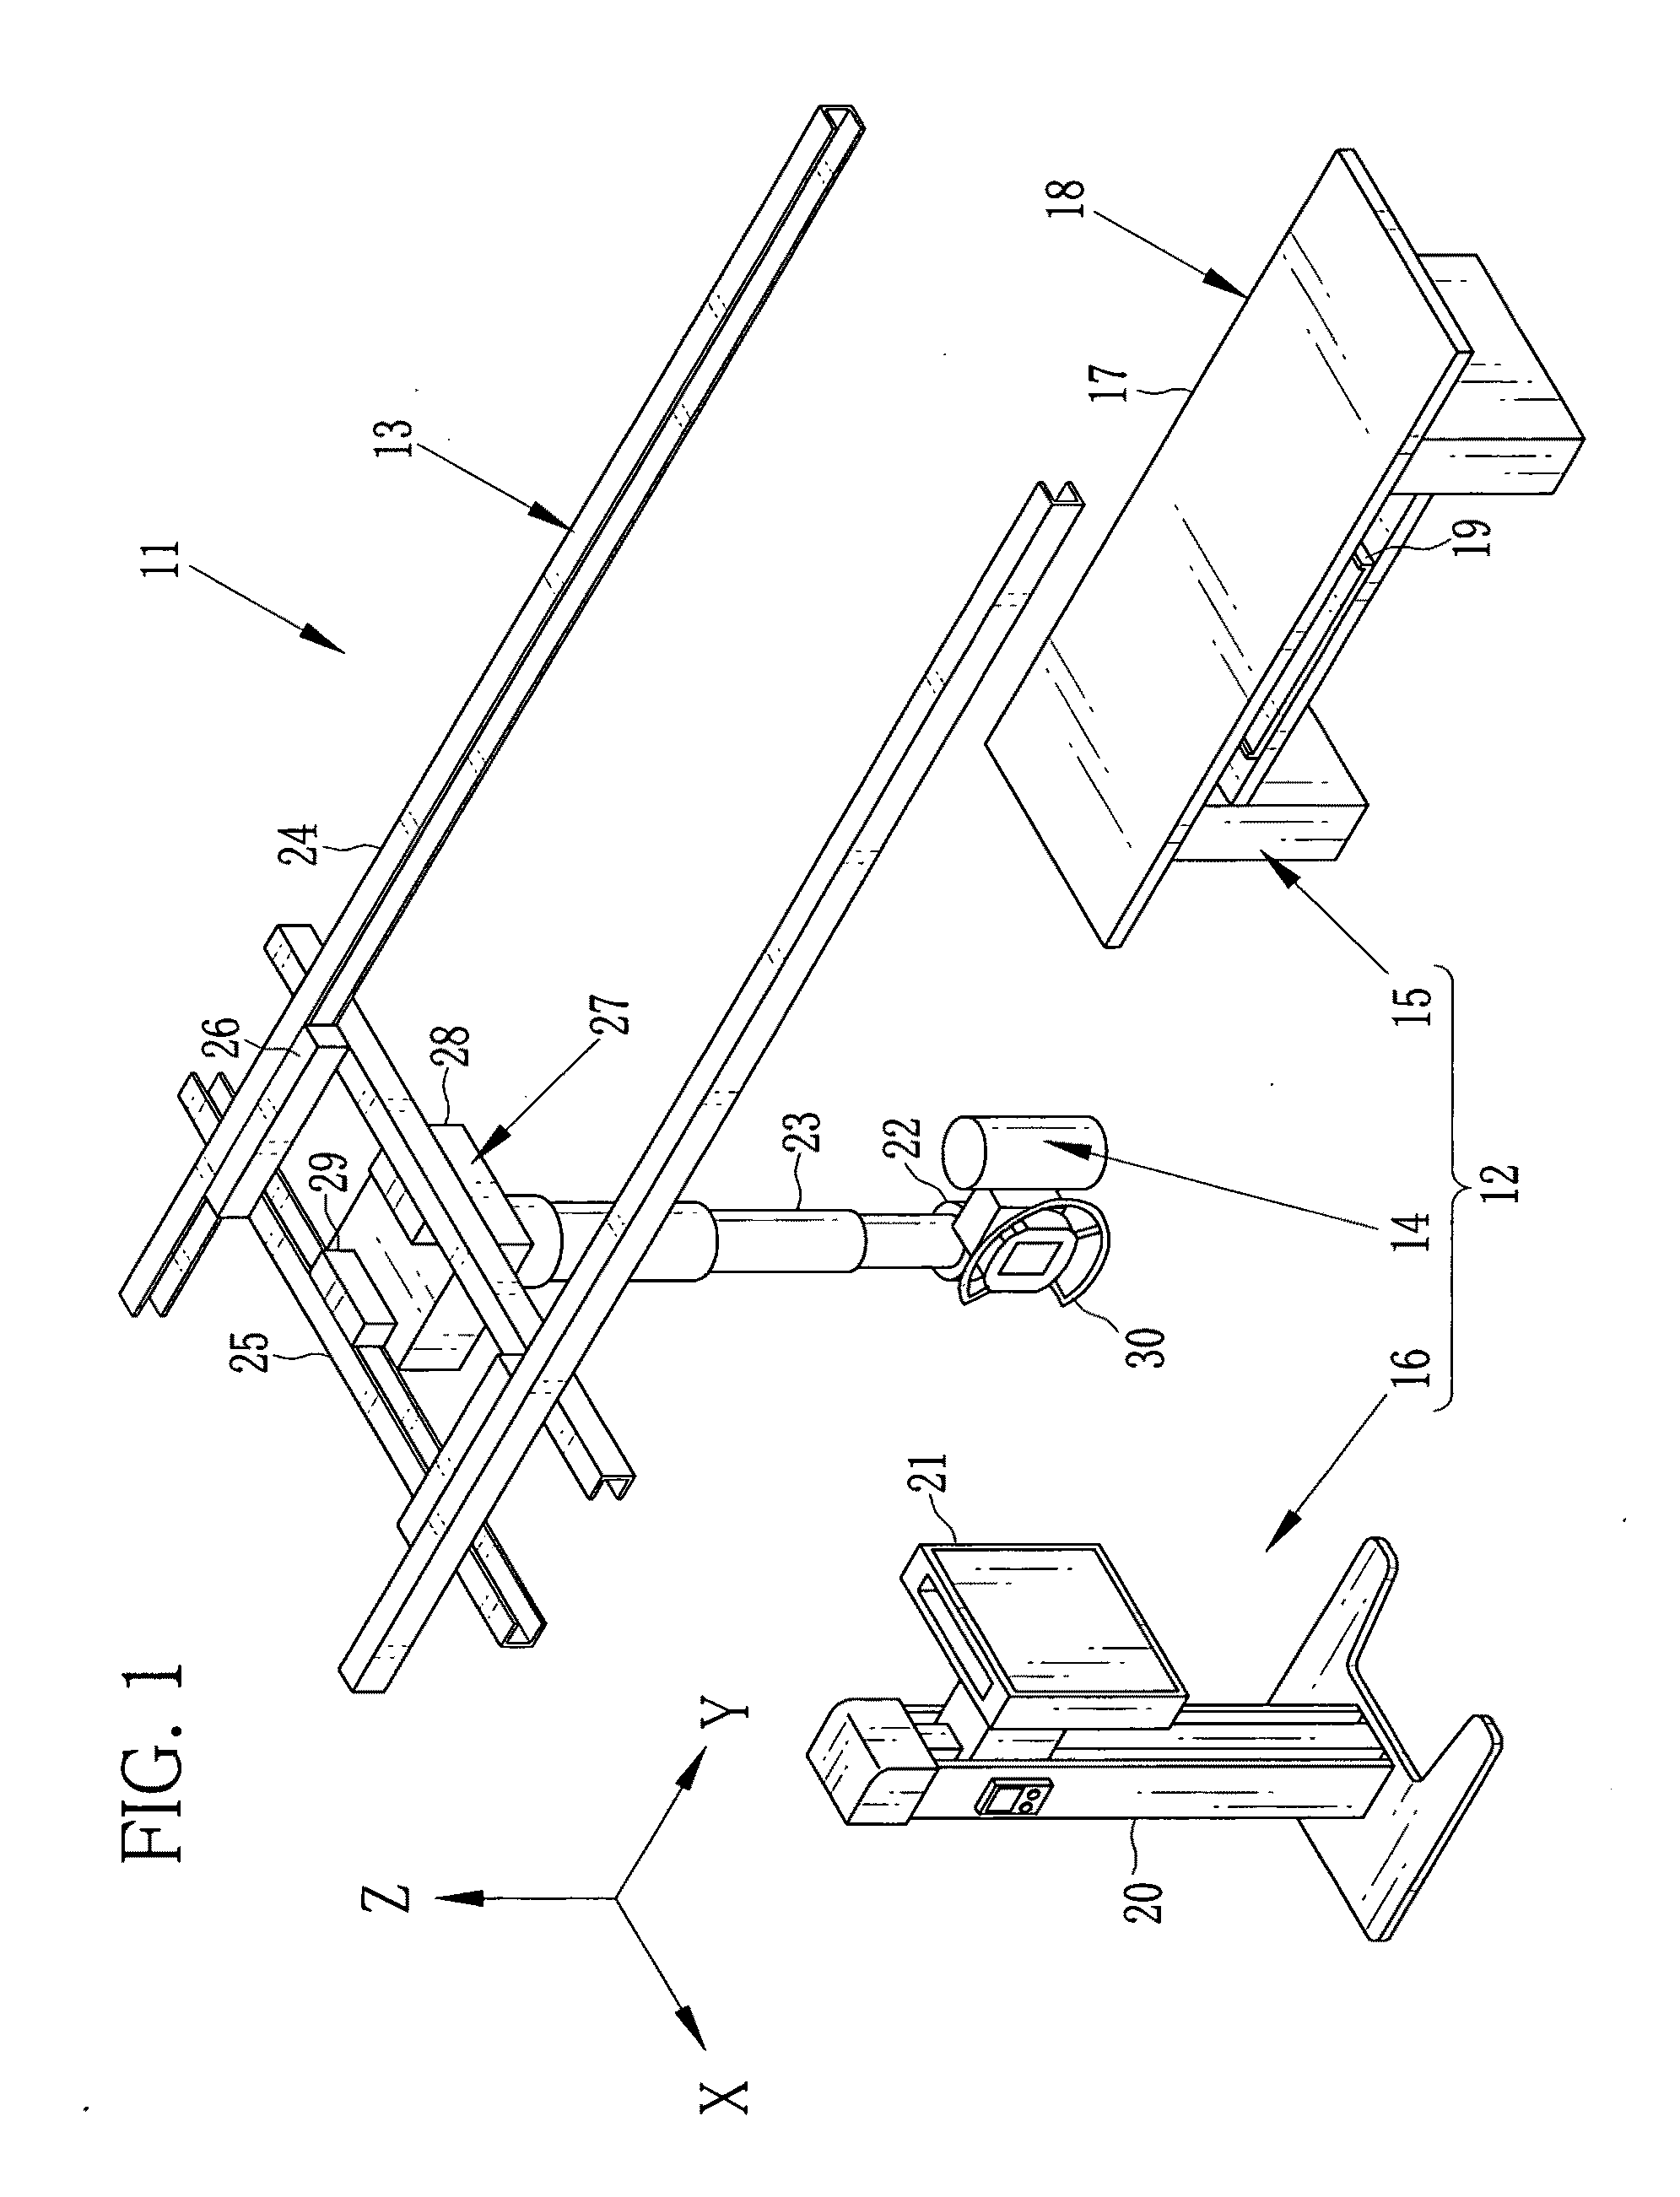 Cassette for radiographic imaging and cassette loading orientation detection device